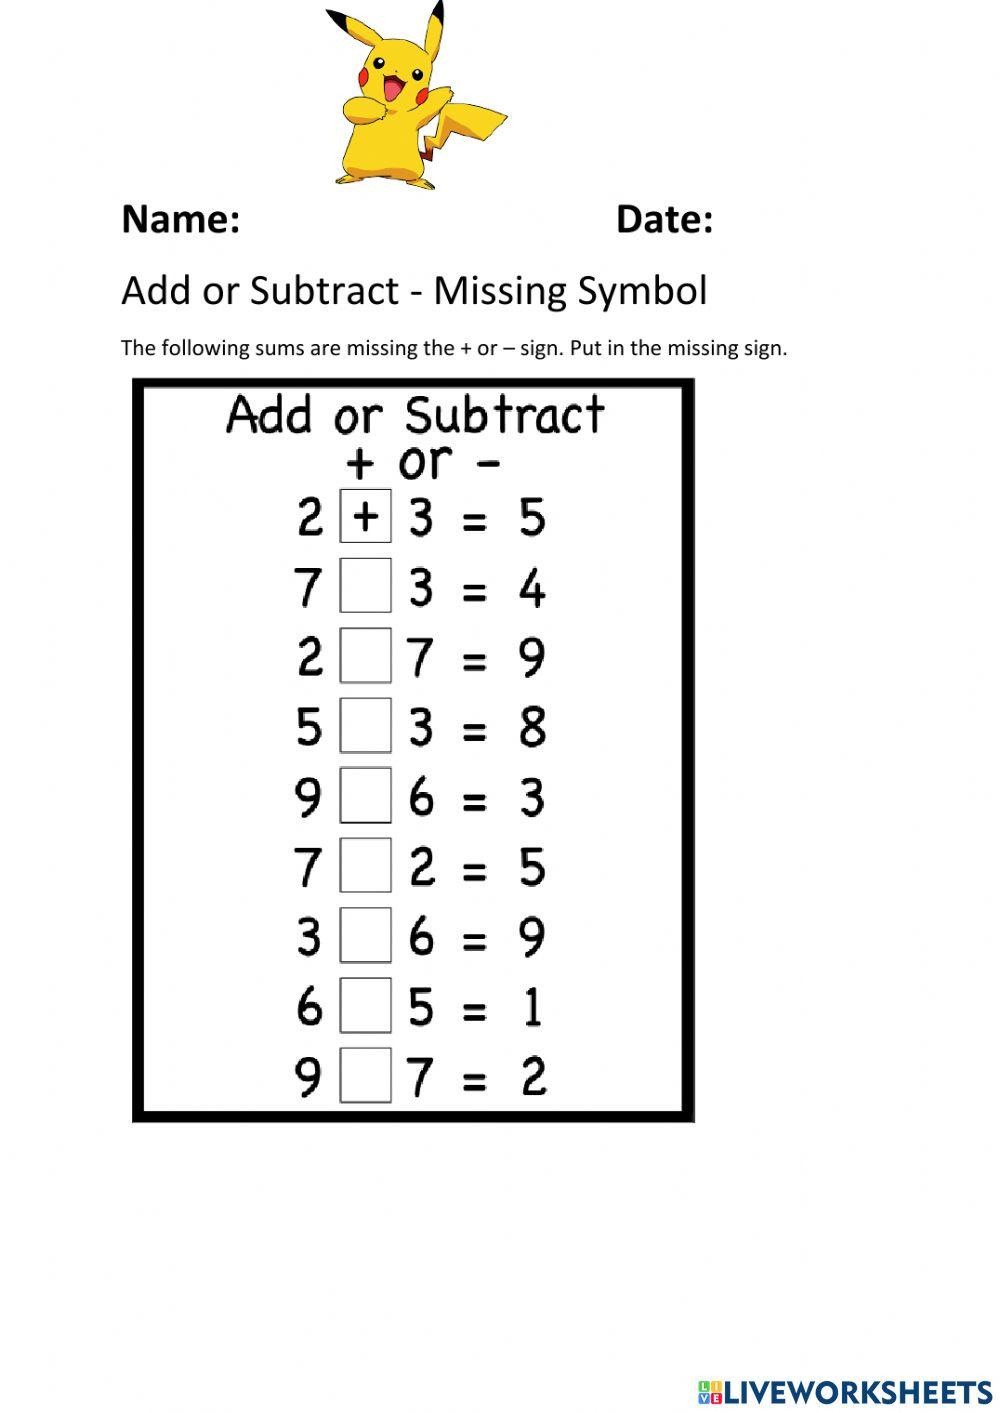 Add or Subtract Missing Symbol 1